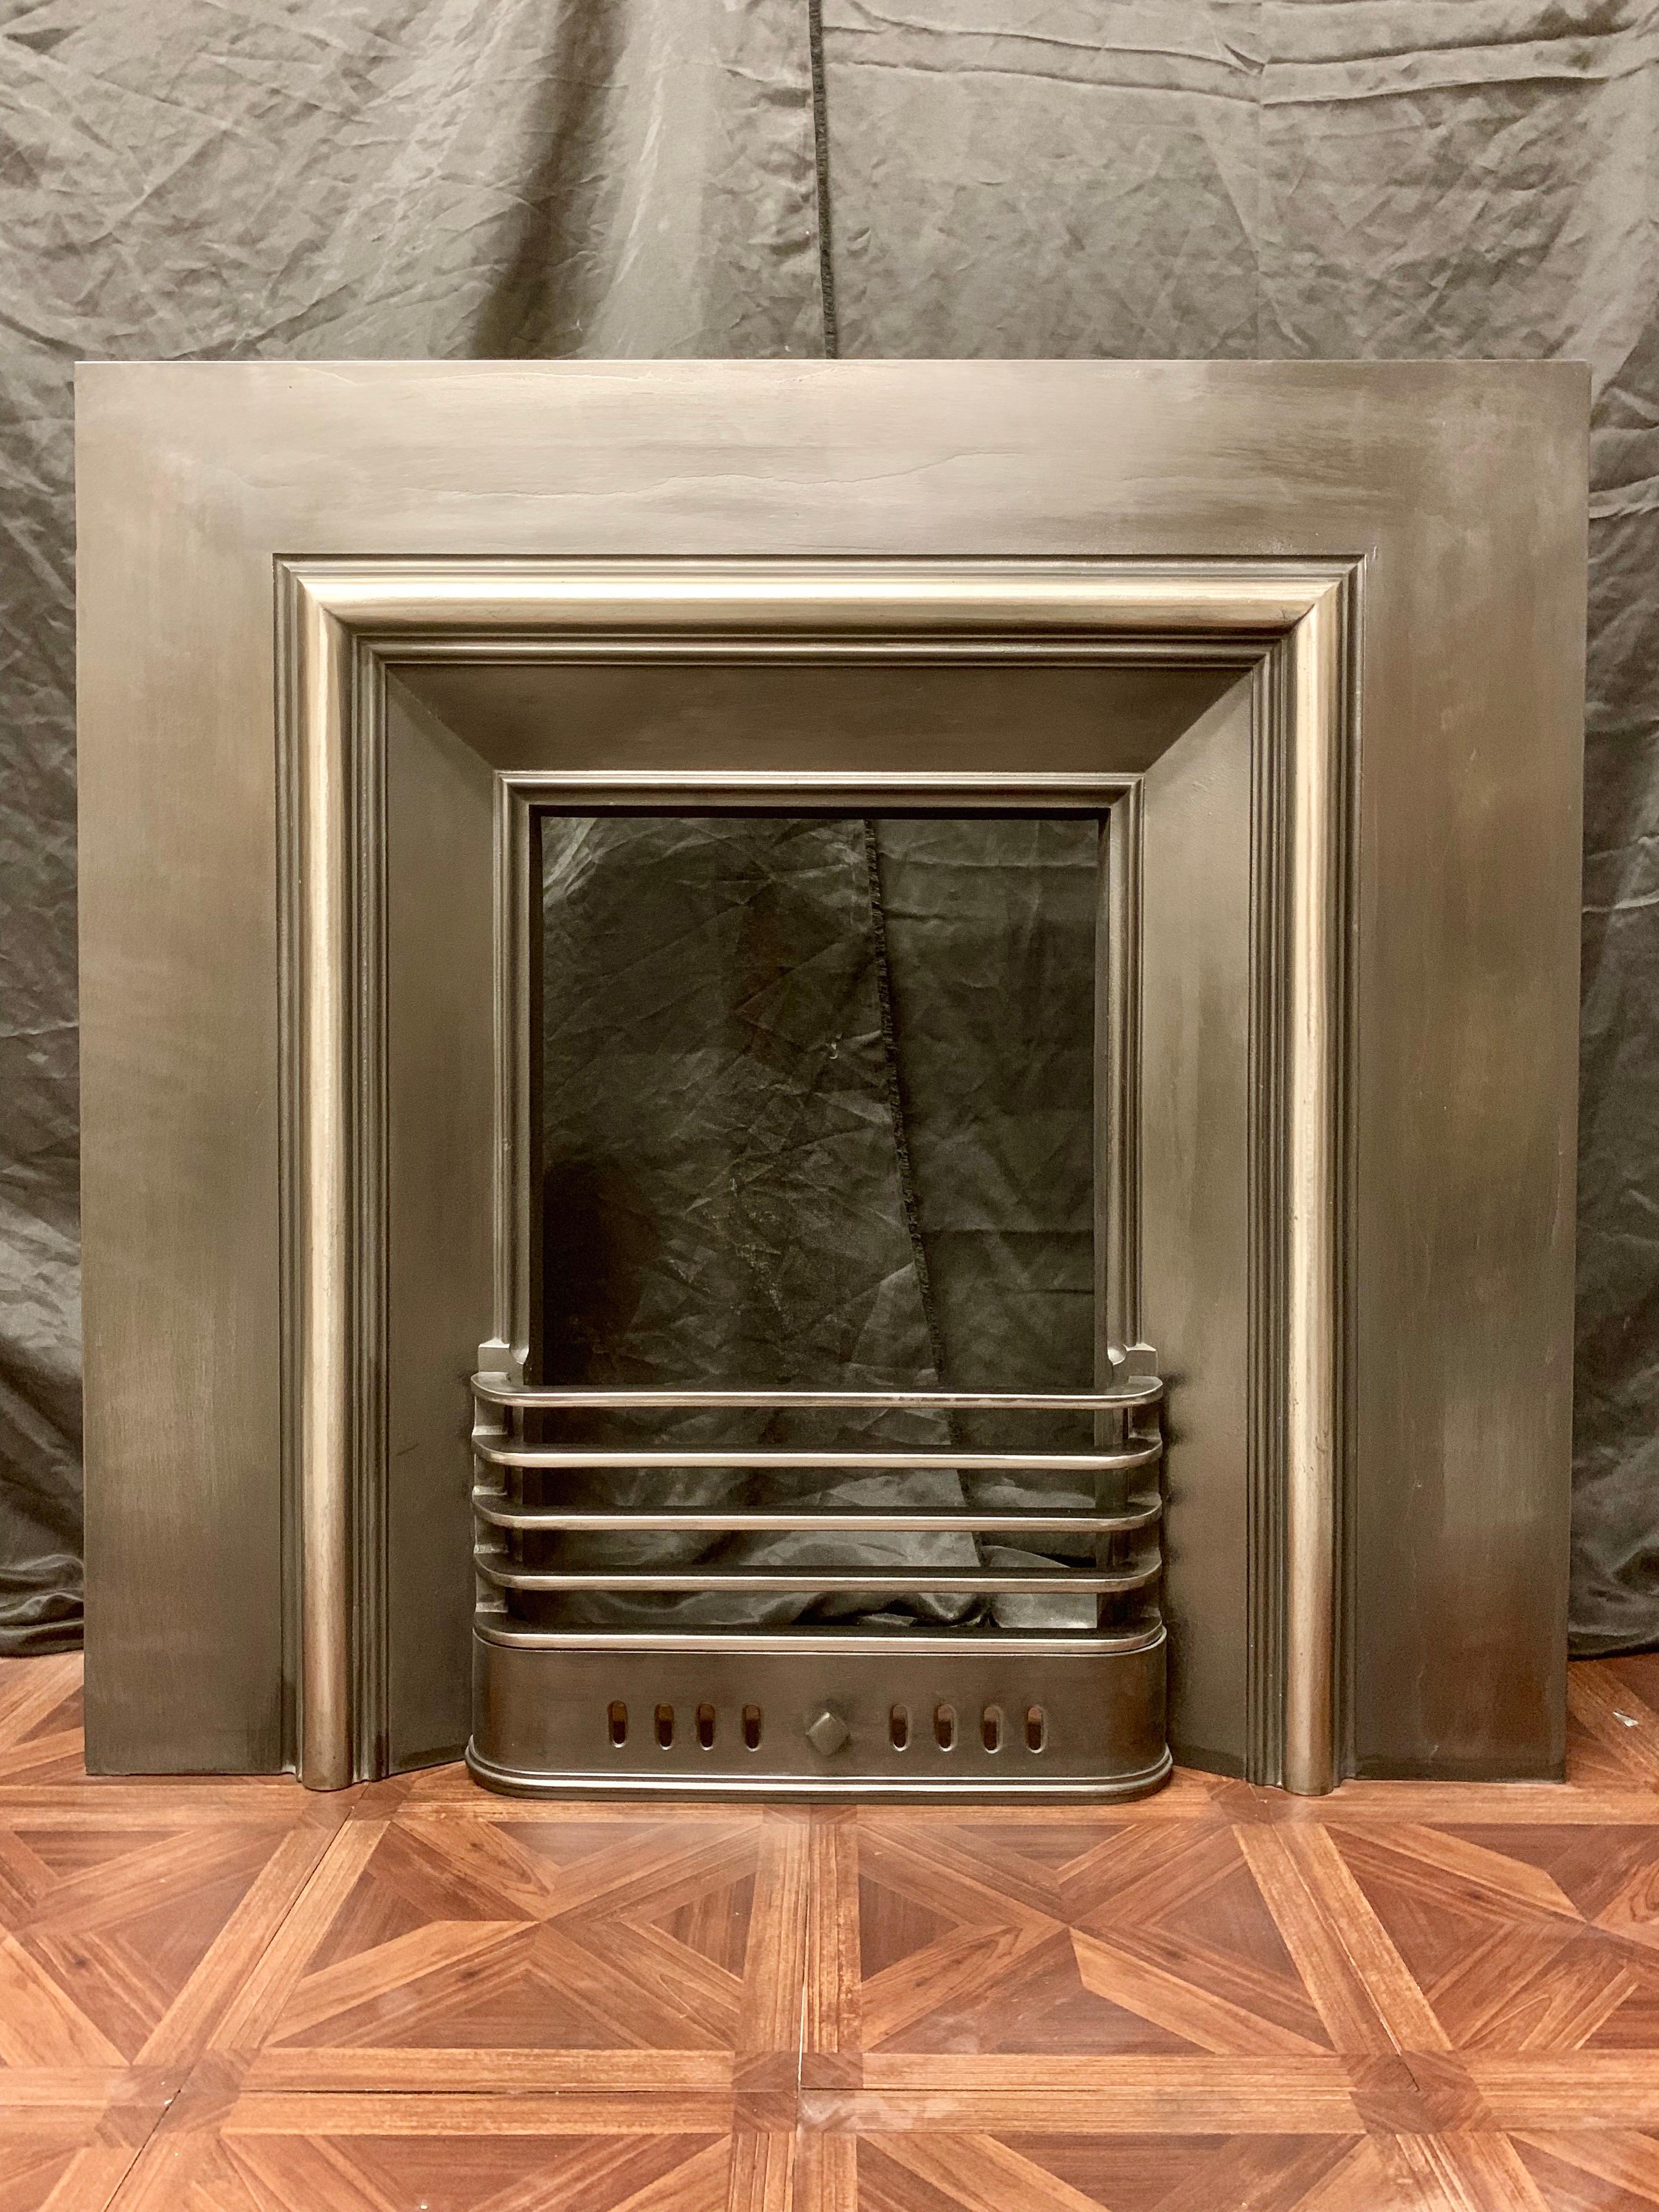 A simple and attractive generous sized 19th century Victorian cast iron fireplace insert with a polished raised moulding framing the opening aperture, with a four barred straight fire grate grill and ash pan cover, would suit a variety of fireplace